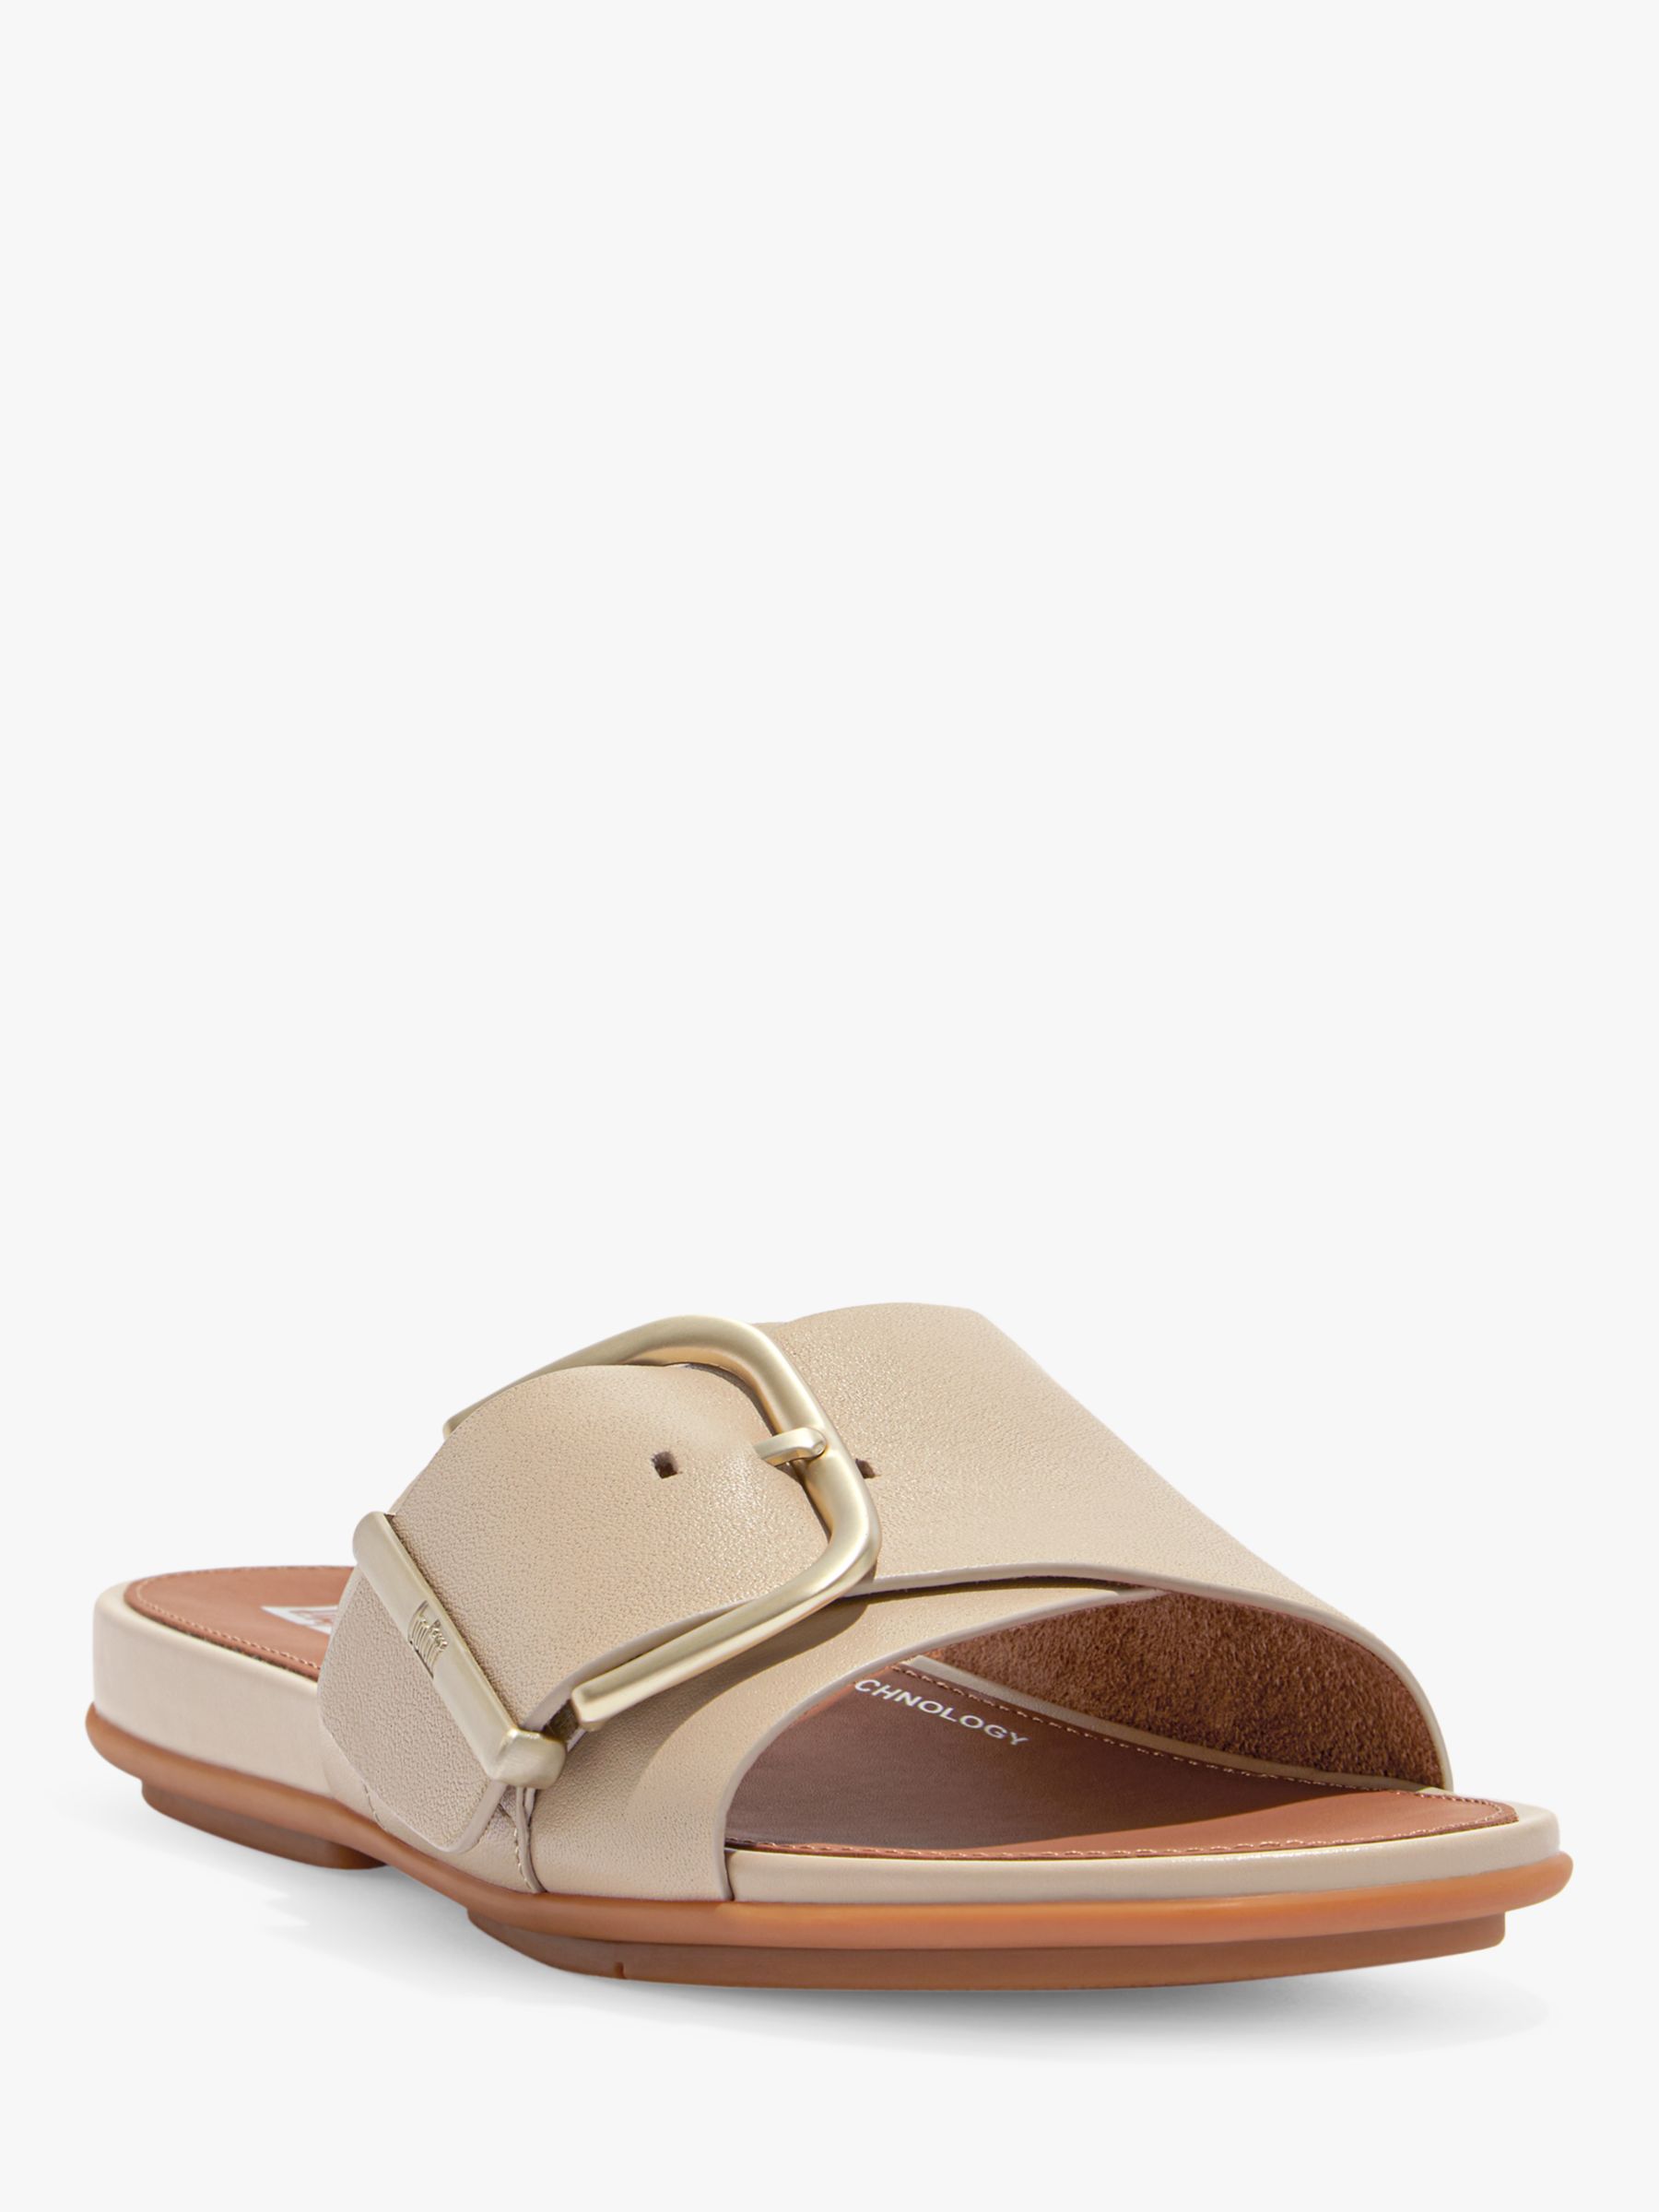 FitFlop Gracie Buckle Pool Sandals, Stone Beige, 9